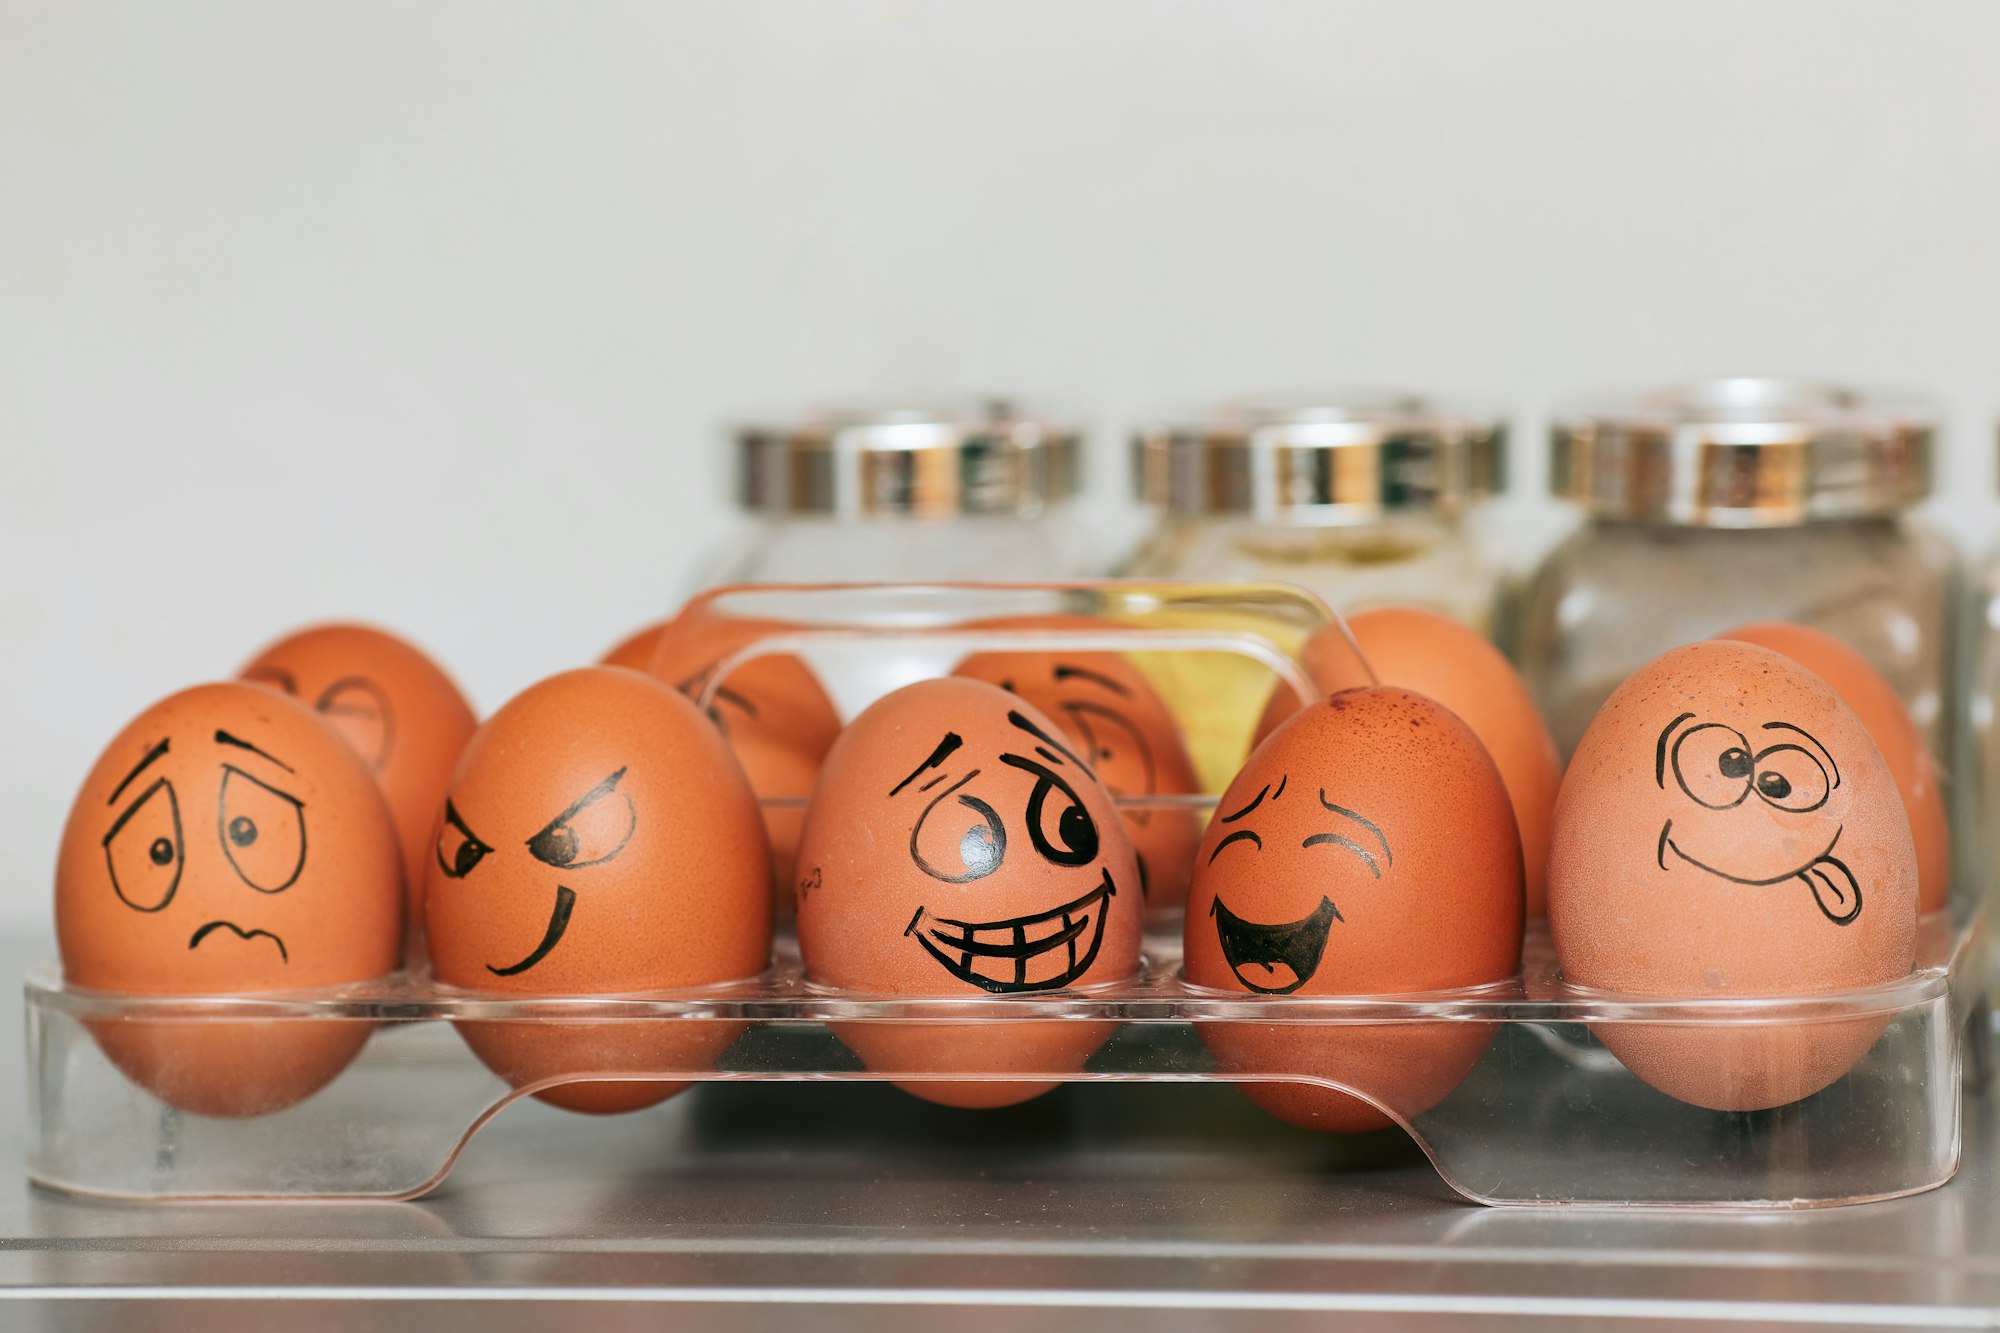 A photograph (wallpaper, picture) of eggs with different emotions against a background of blurred spices and a smooth gray wall.  Whole painted eggs in the kitchen, expressing a spectrum of emotions from sadness to joy or madness. Eggs with smile and crazy face.